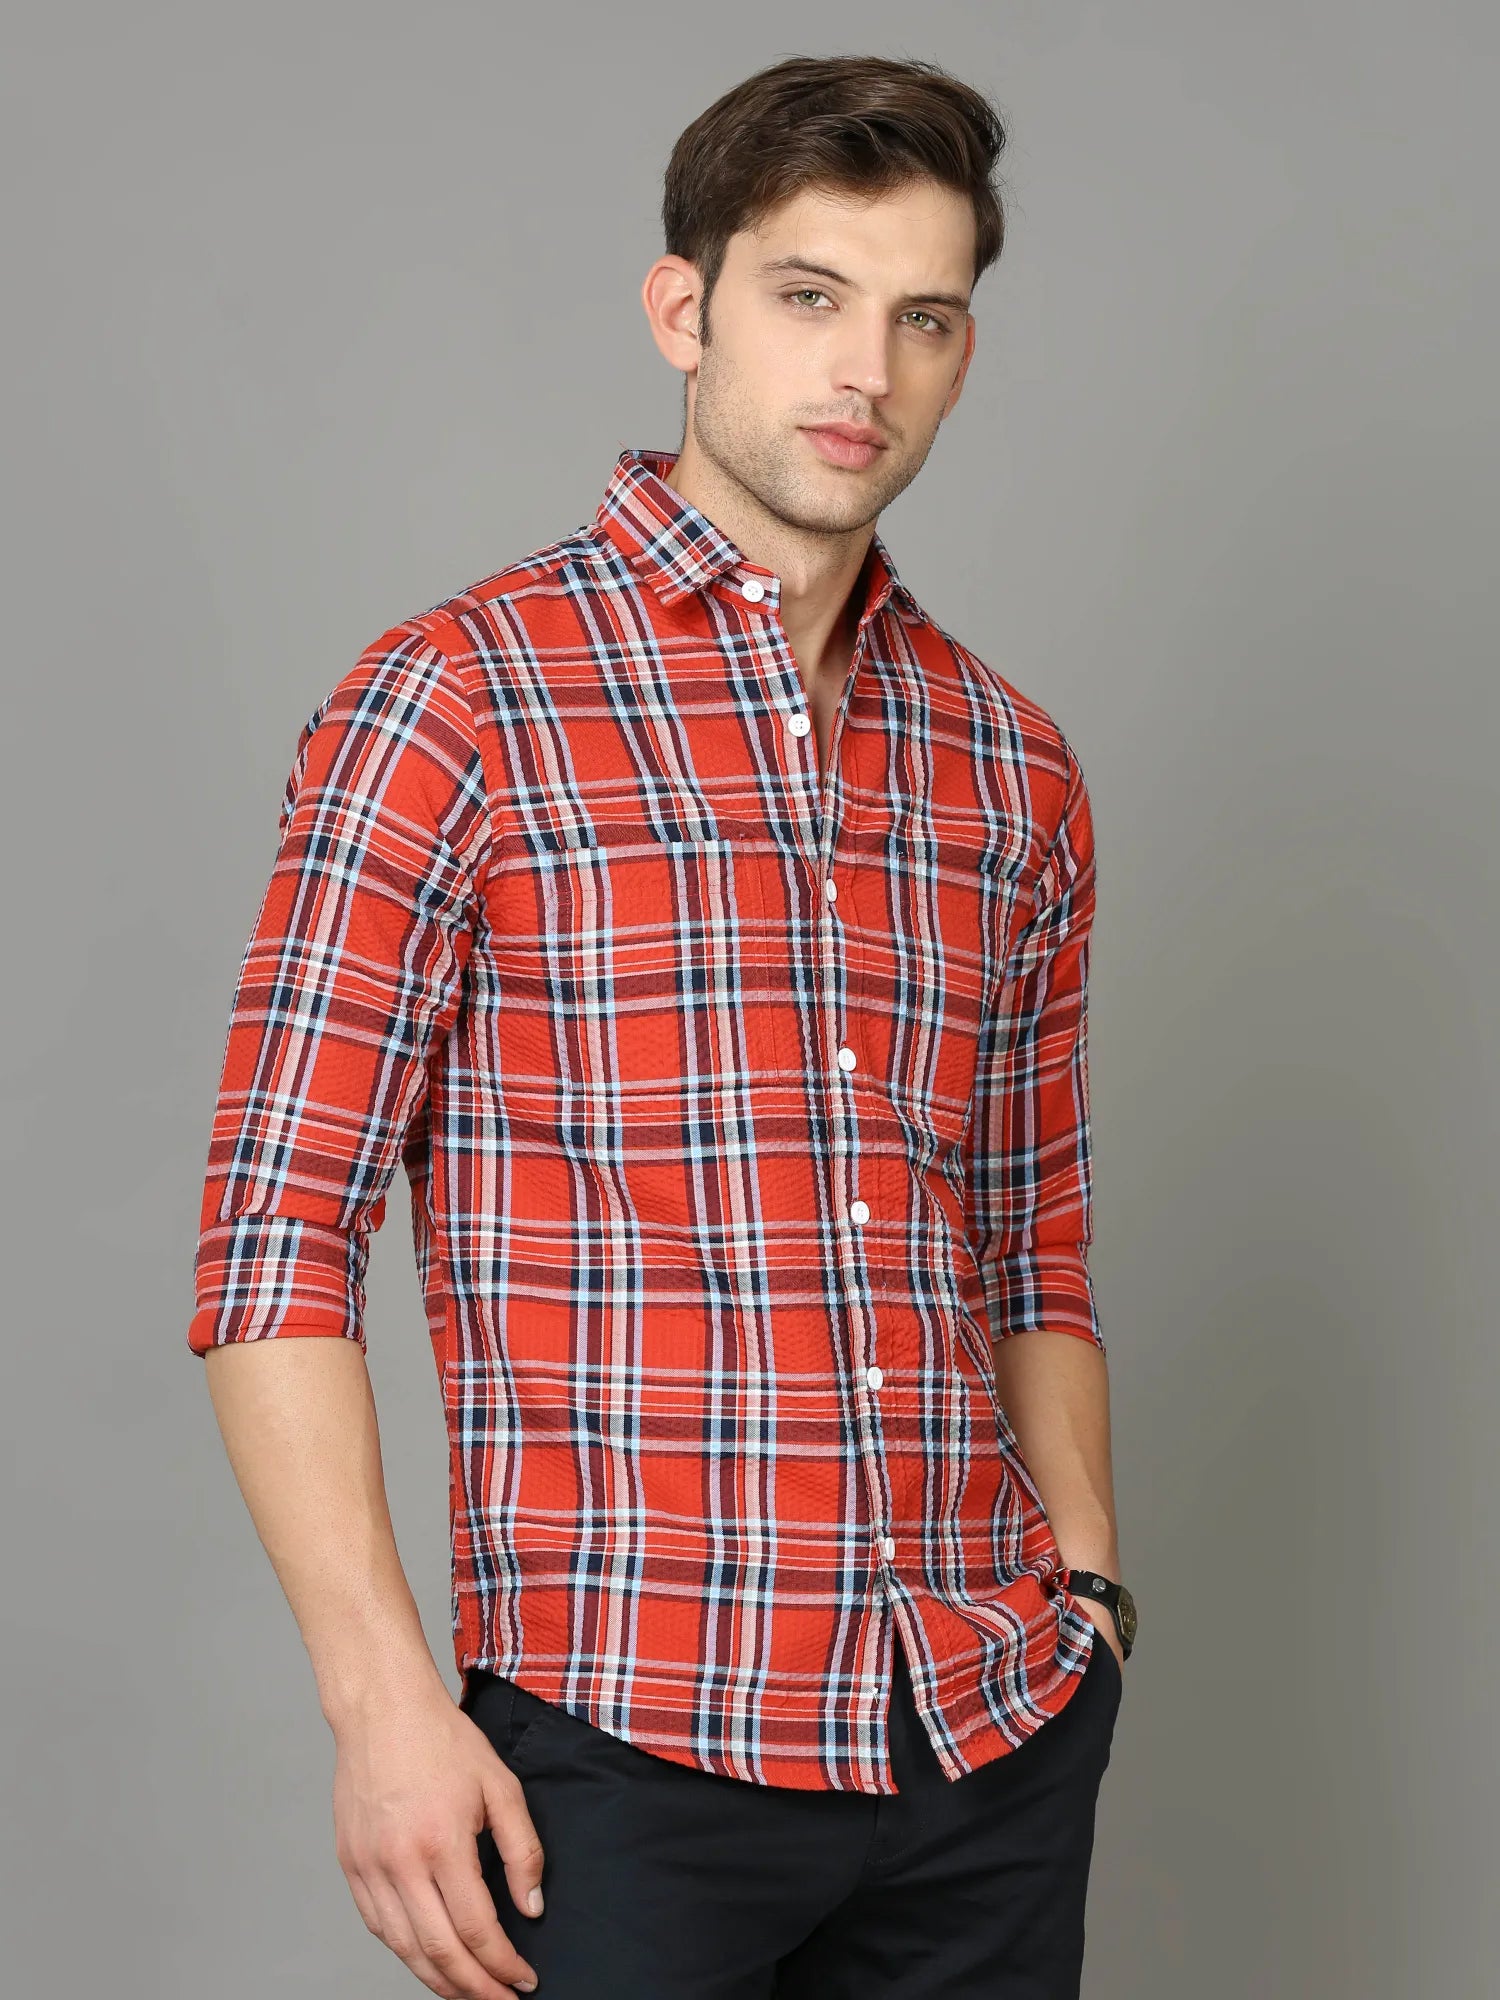 Style Cheerful Checkered Shirt for Men